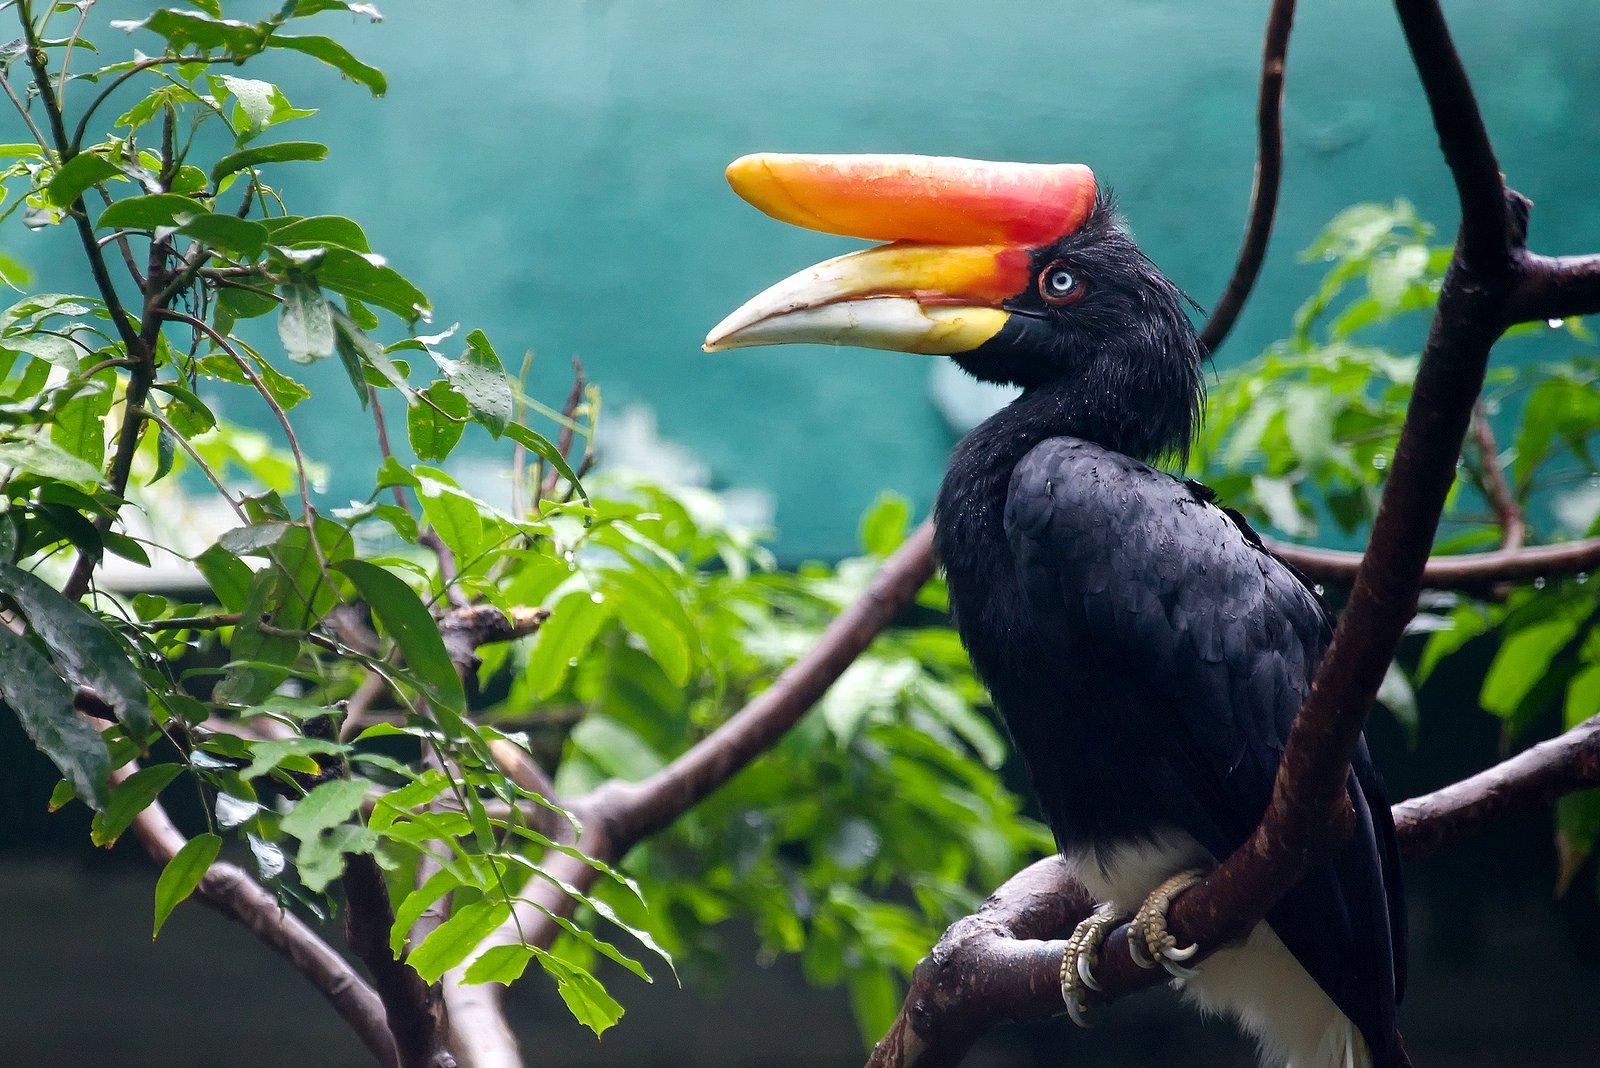 How to see hornbills in Kuala Lumpur